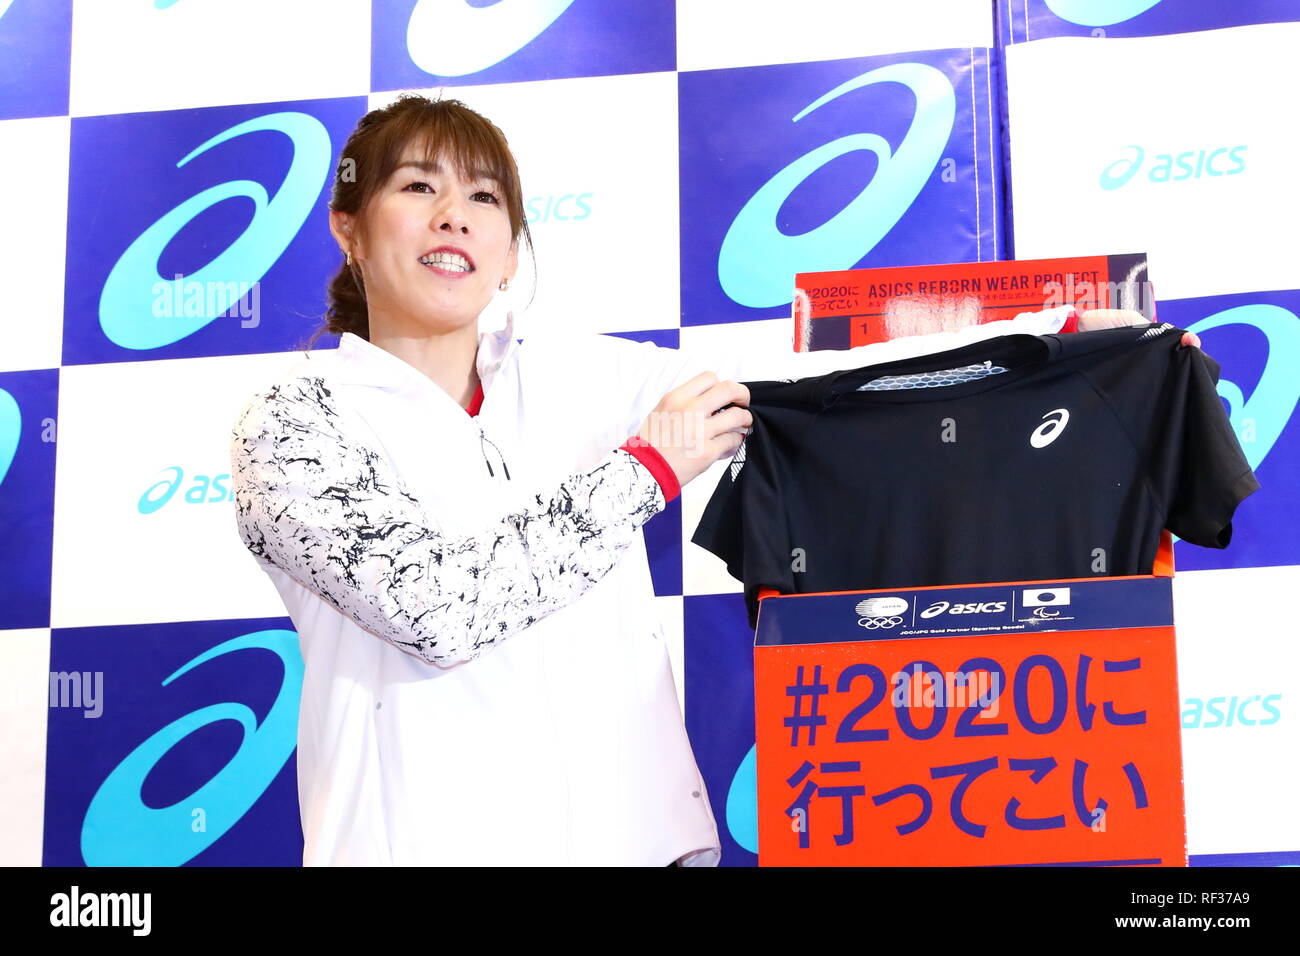 Saori Yoshida, JANUARY 24, 2019: ASICS Corporation attends a press  conference to announce ASICS REBRON WEAR PROJECT for the Tokyo 2020 Olympic  and Paralympic games in Tokyo, Japan. Credit: Naoki Nishimura/AFLO  SPORT/Alamy